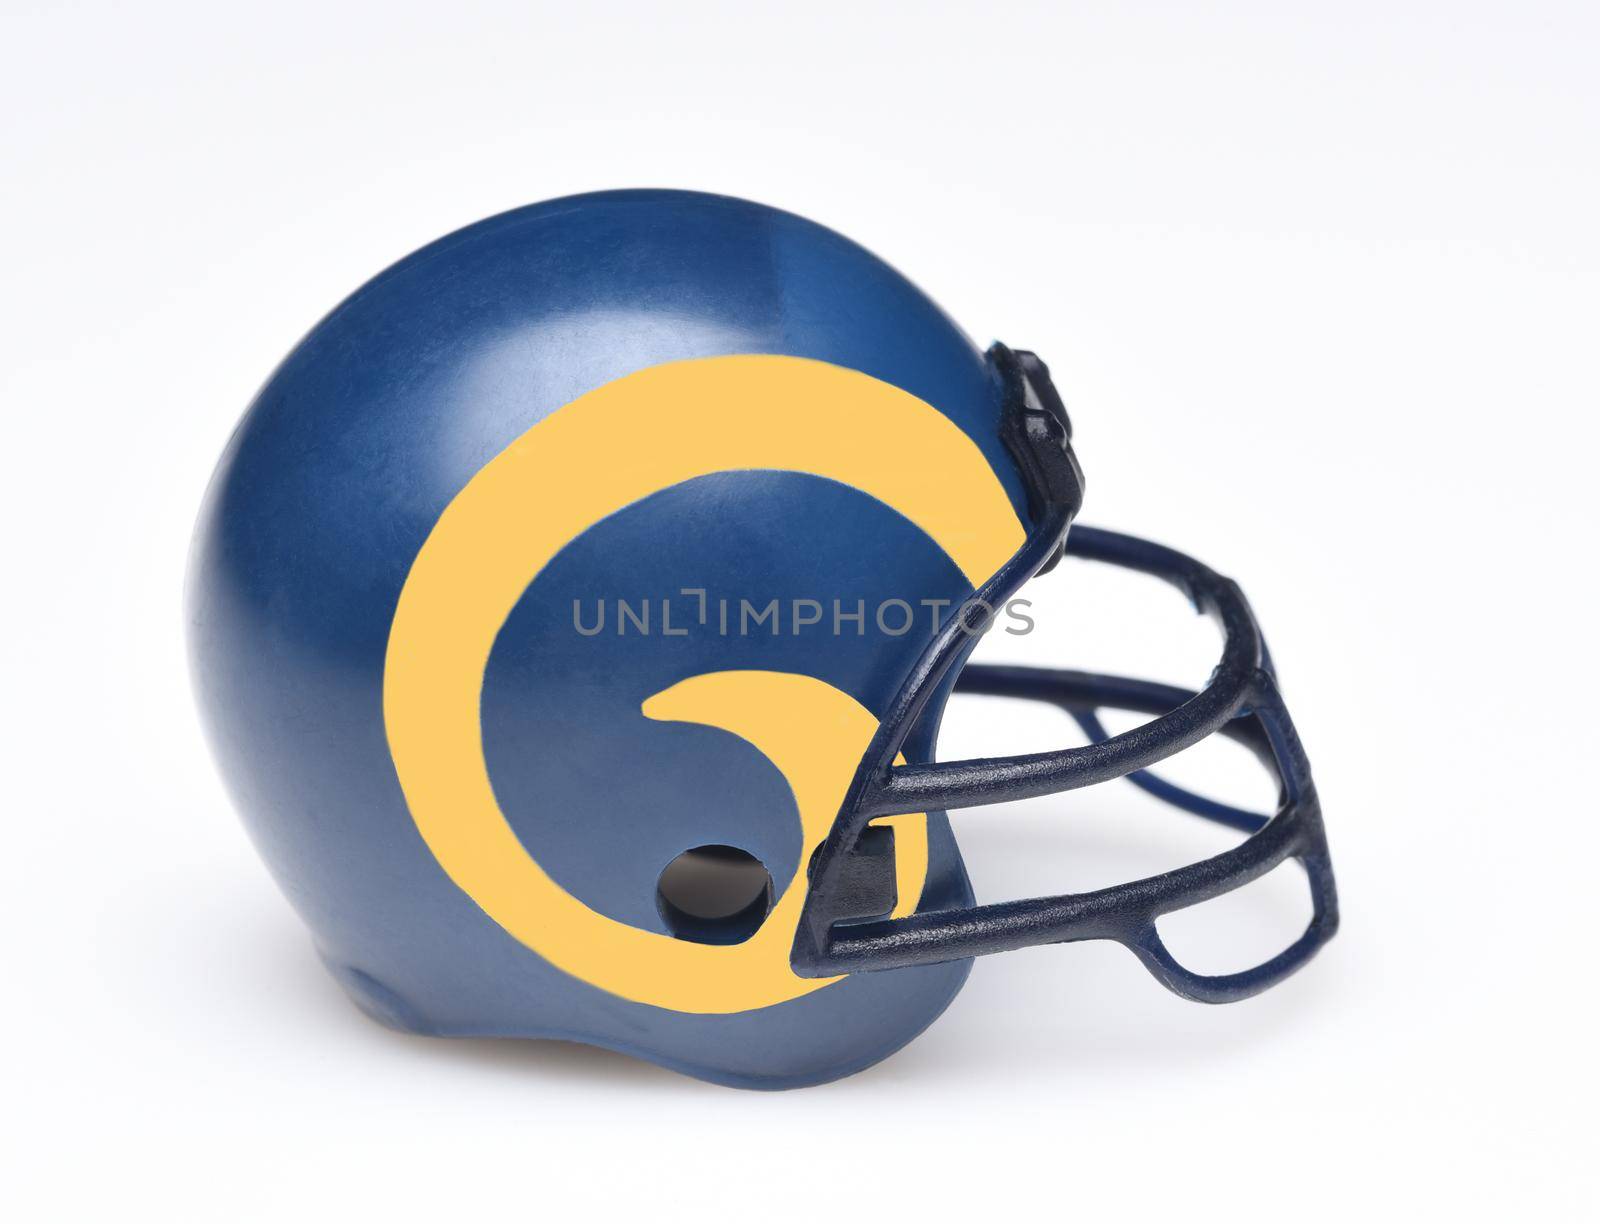 IRVINE, CALIFORNIA - AUGUST 30, 2018: Mini Collectable Football Helmet for the Los Angeles Rams of the National Football Conference West.